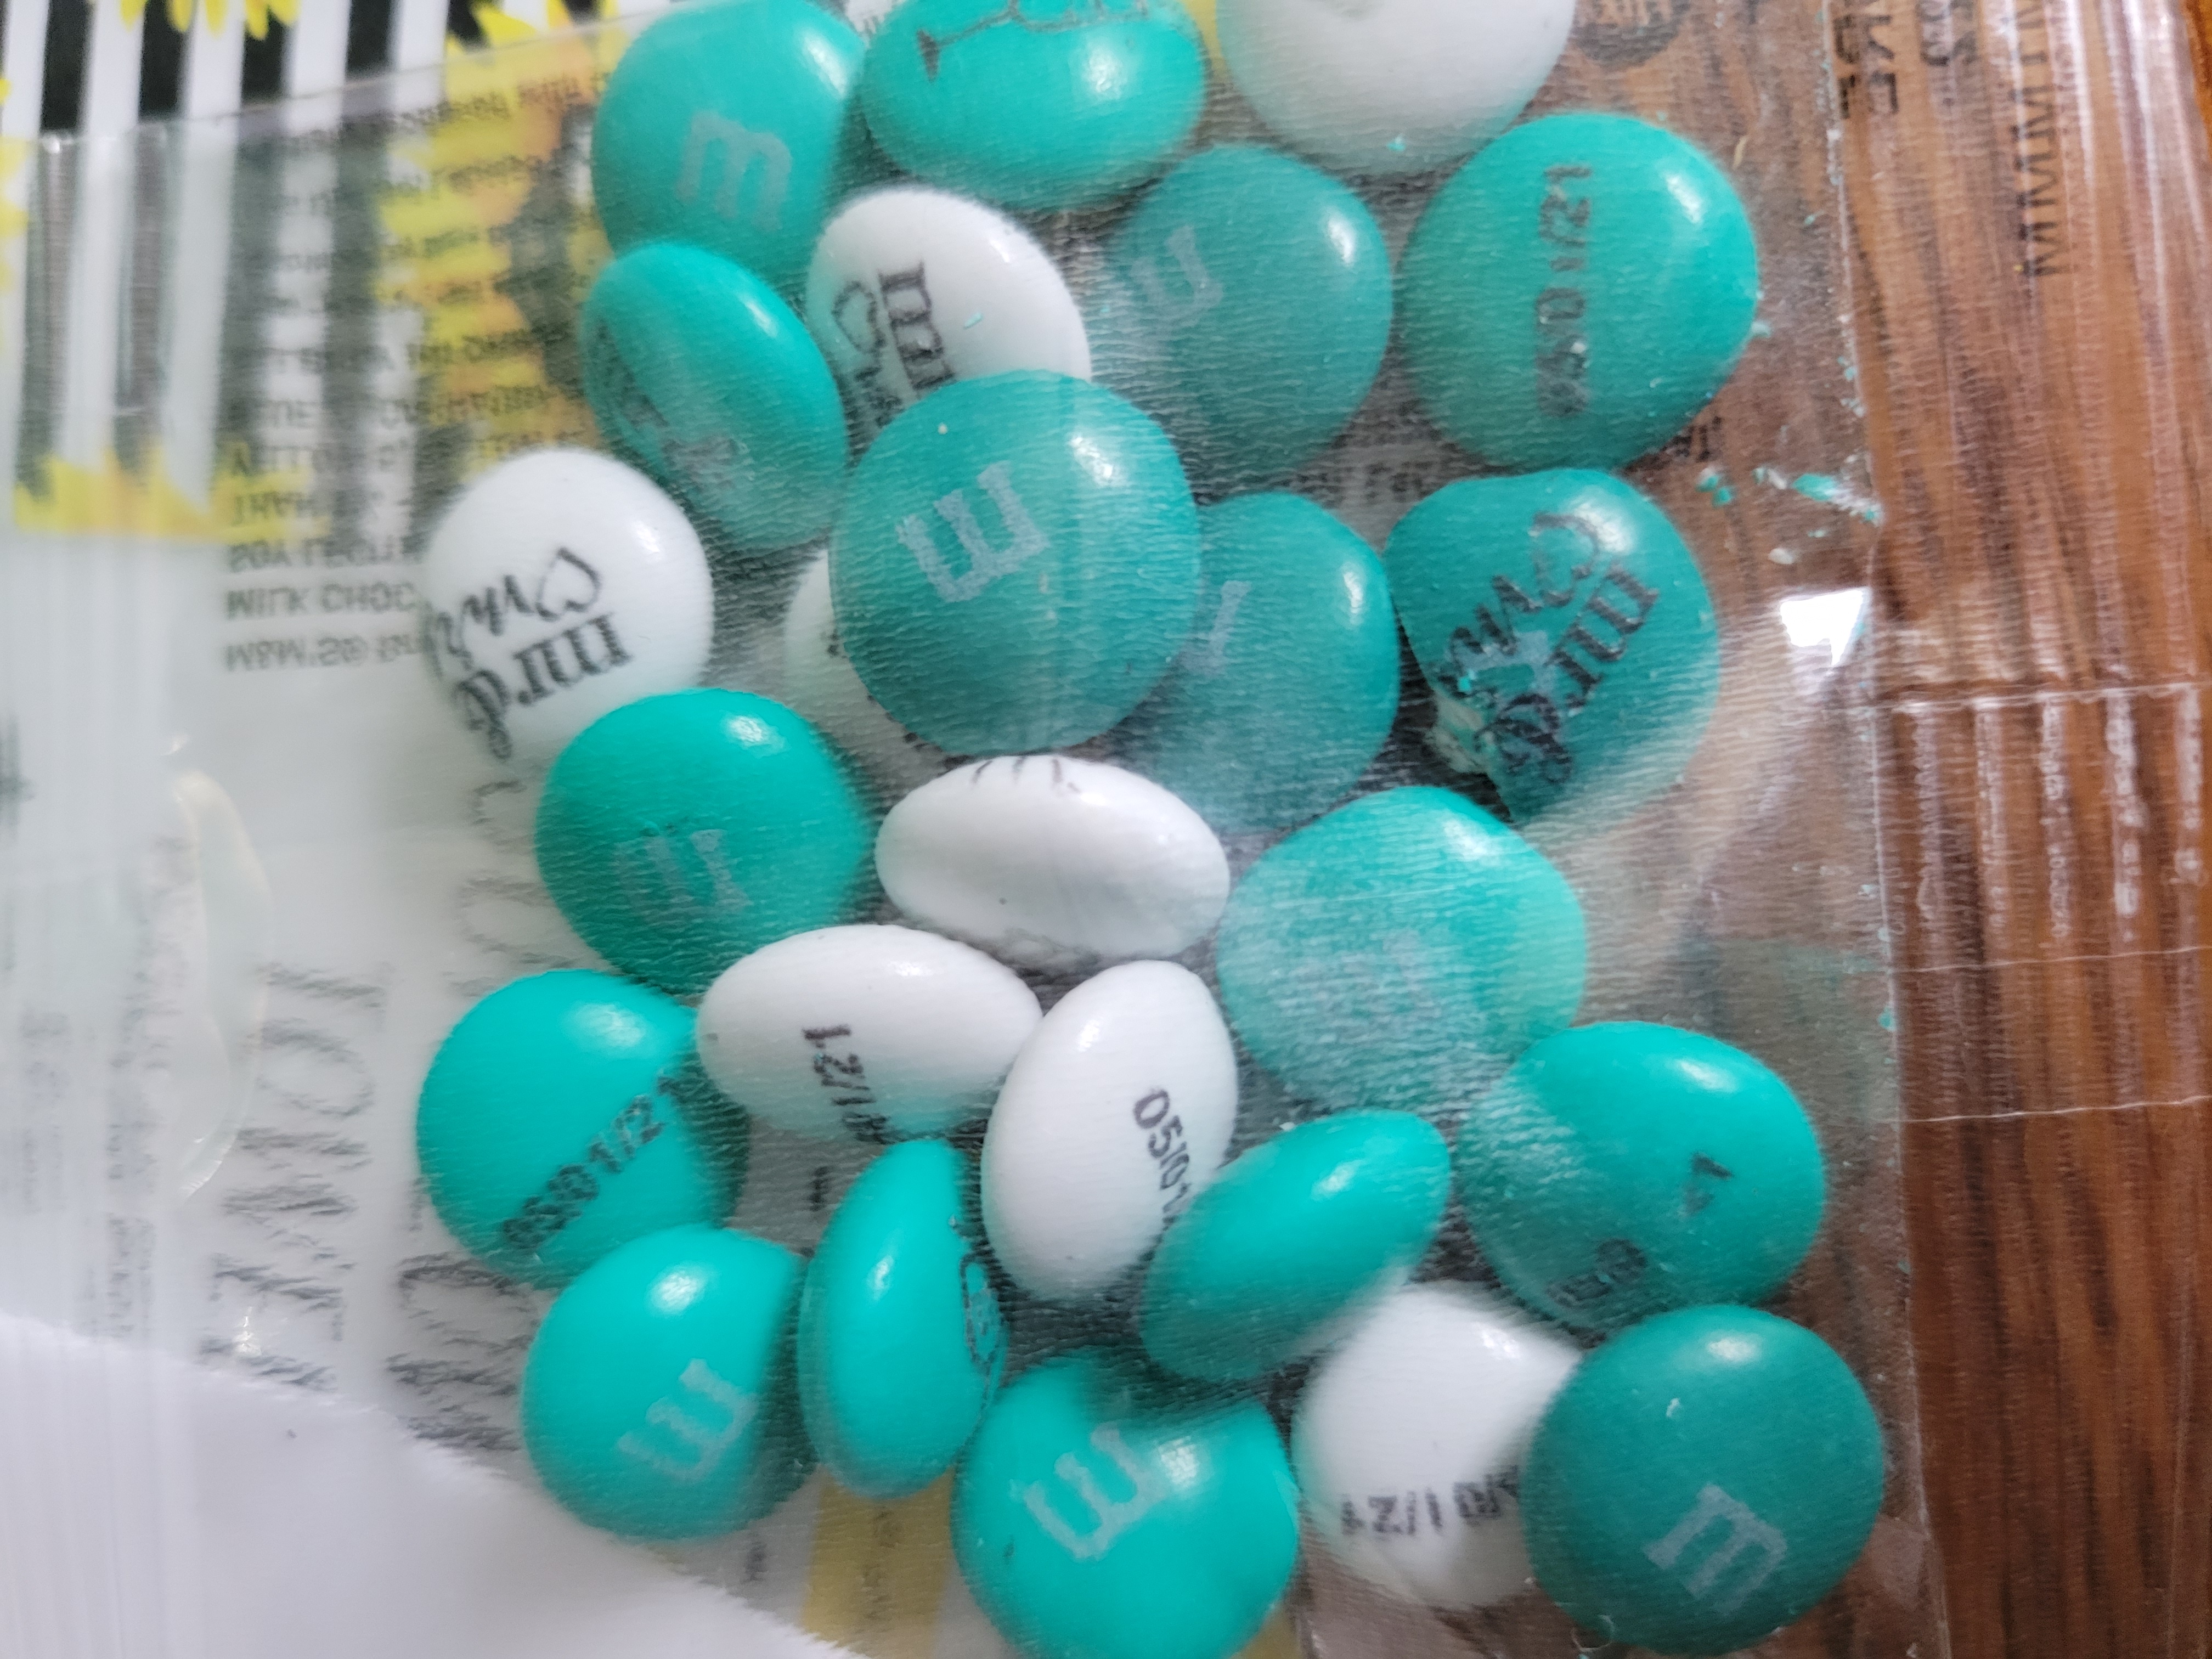 Personalized M&M'S at MyMMS.com (Up to 41% Off)